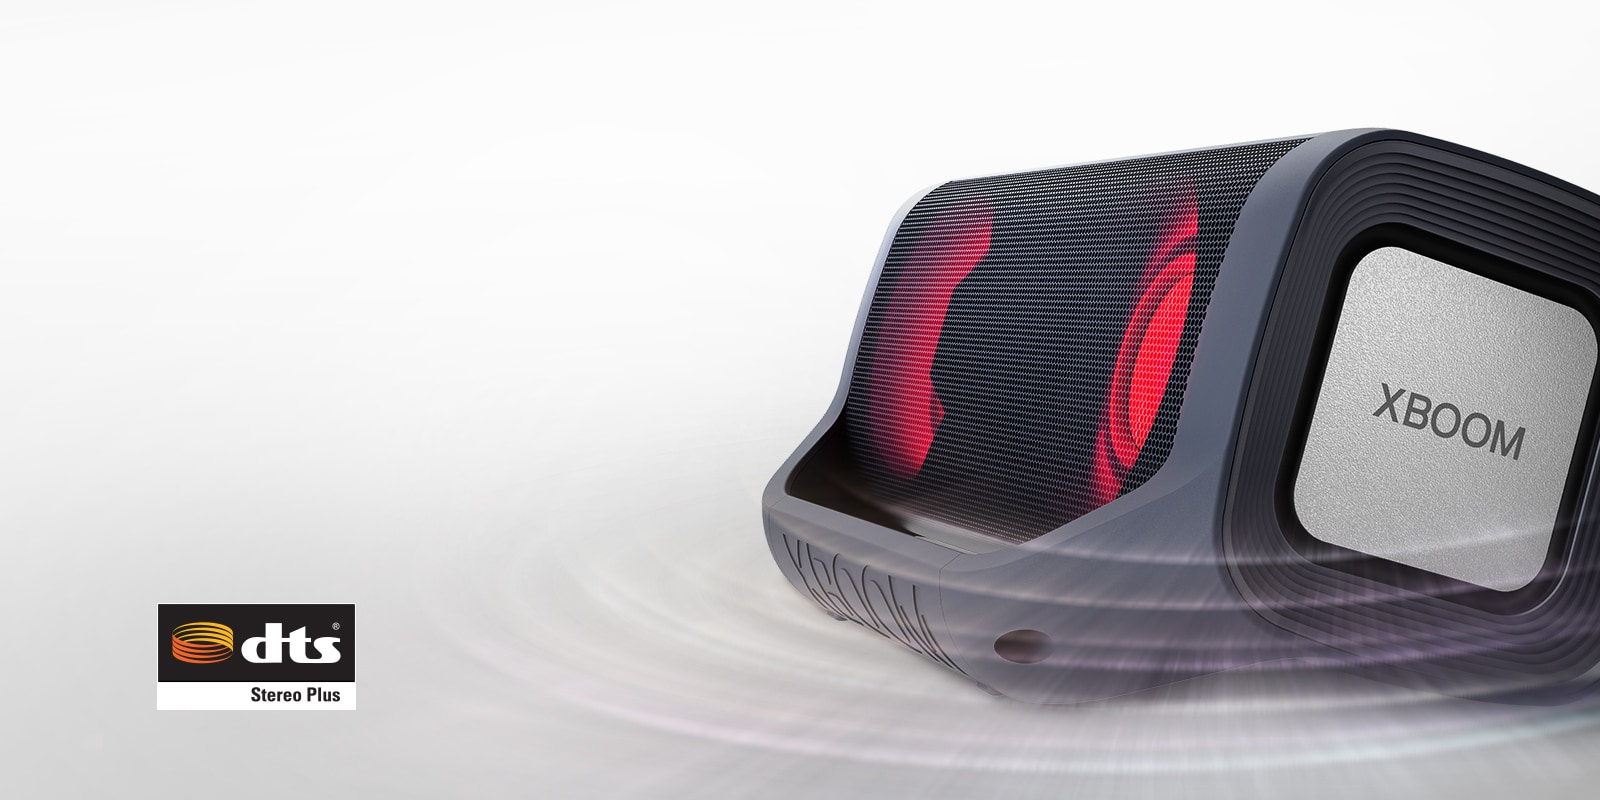 Mid-shot of the left side of an LG XBOOM Go on a white surface. It has red lighting and a ripple wave effect around it.